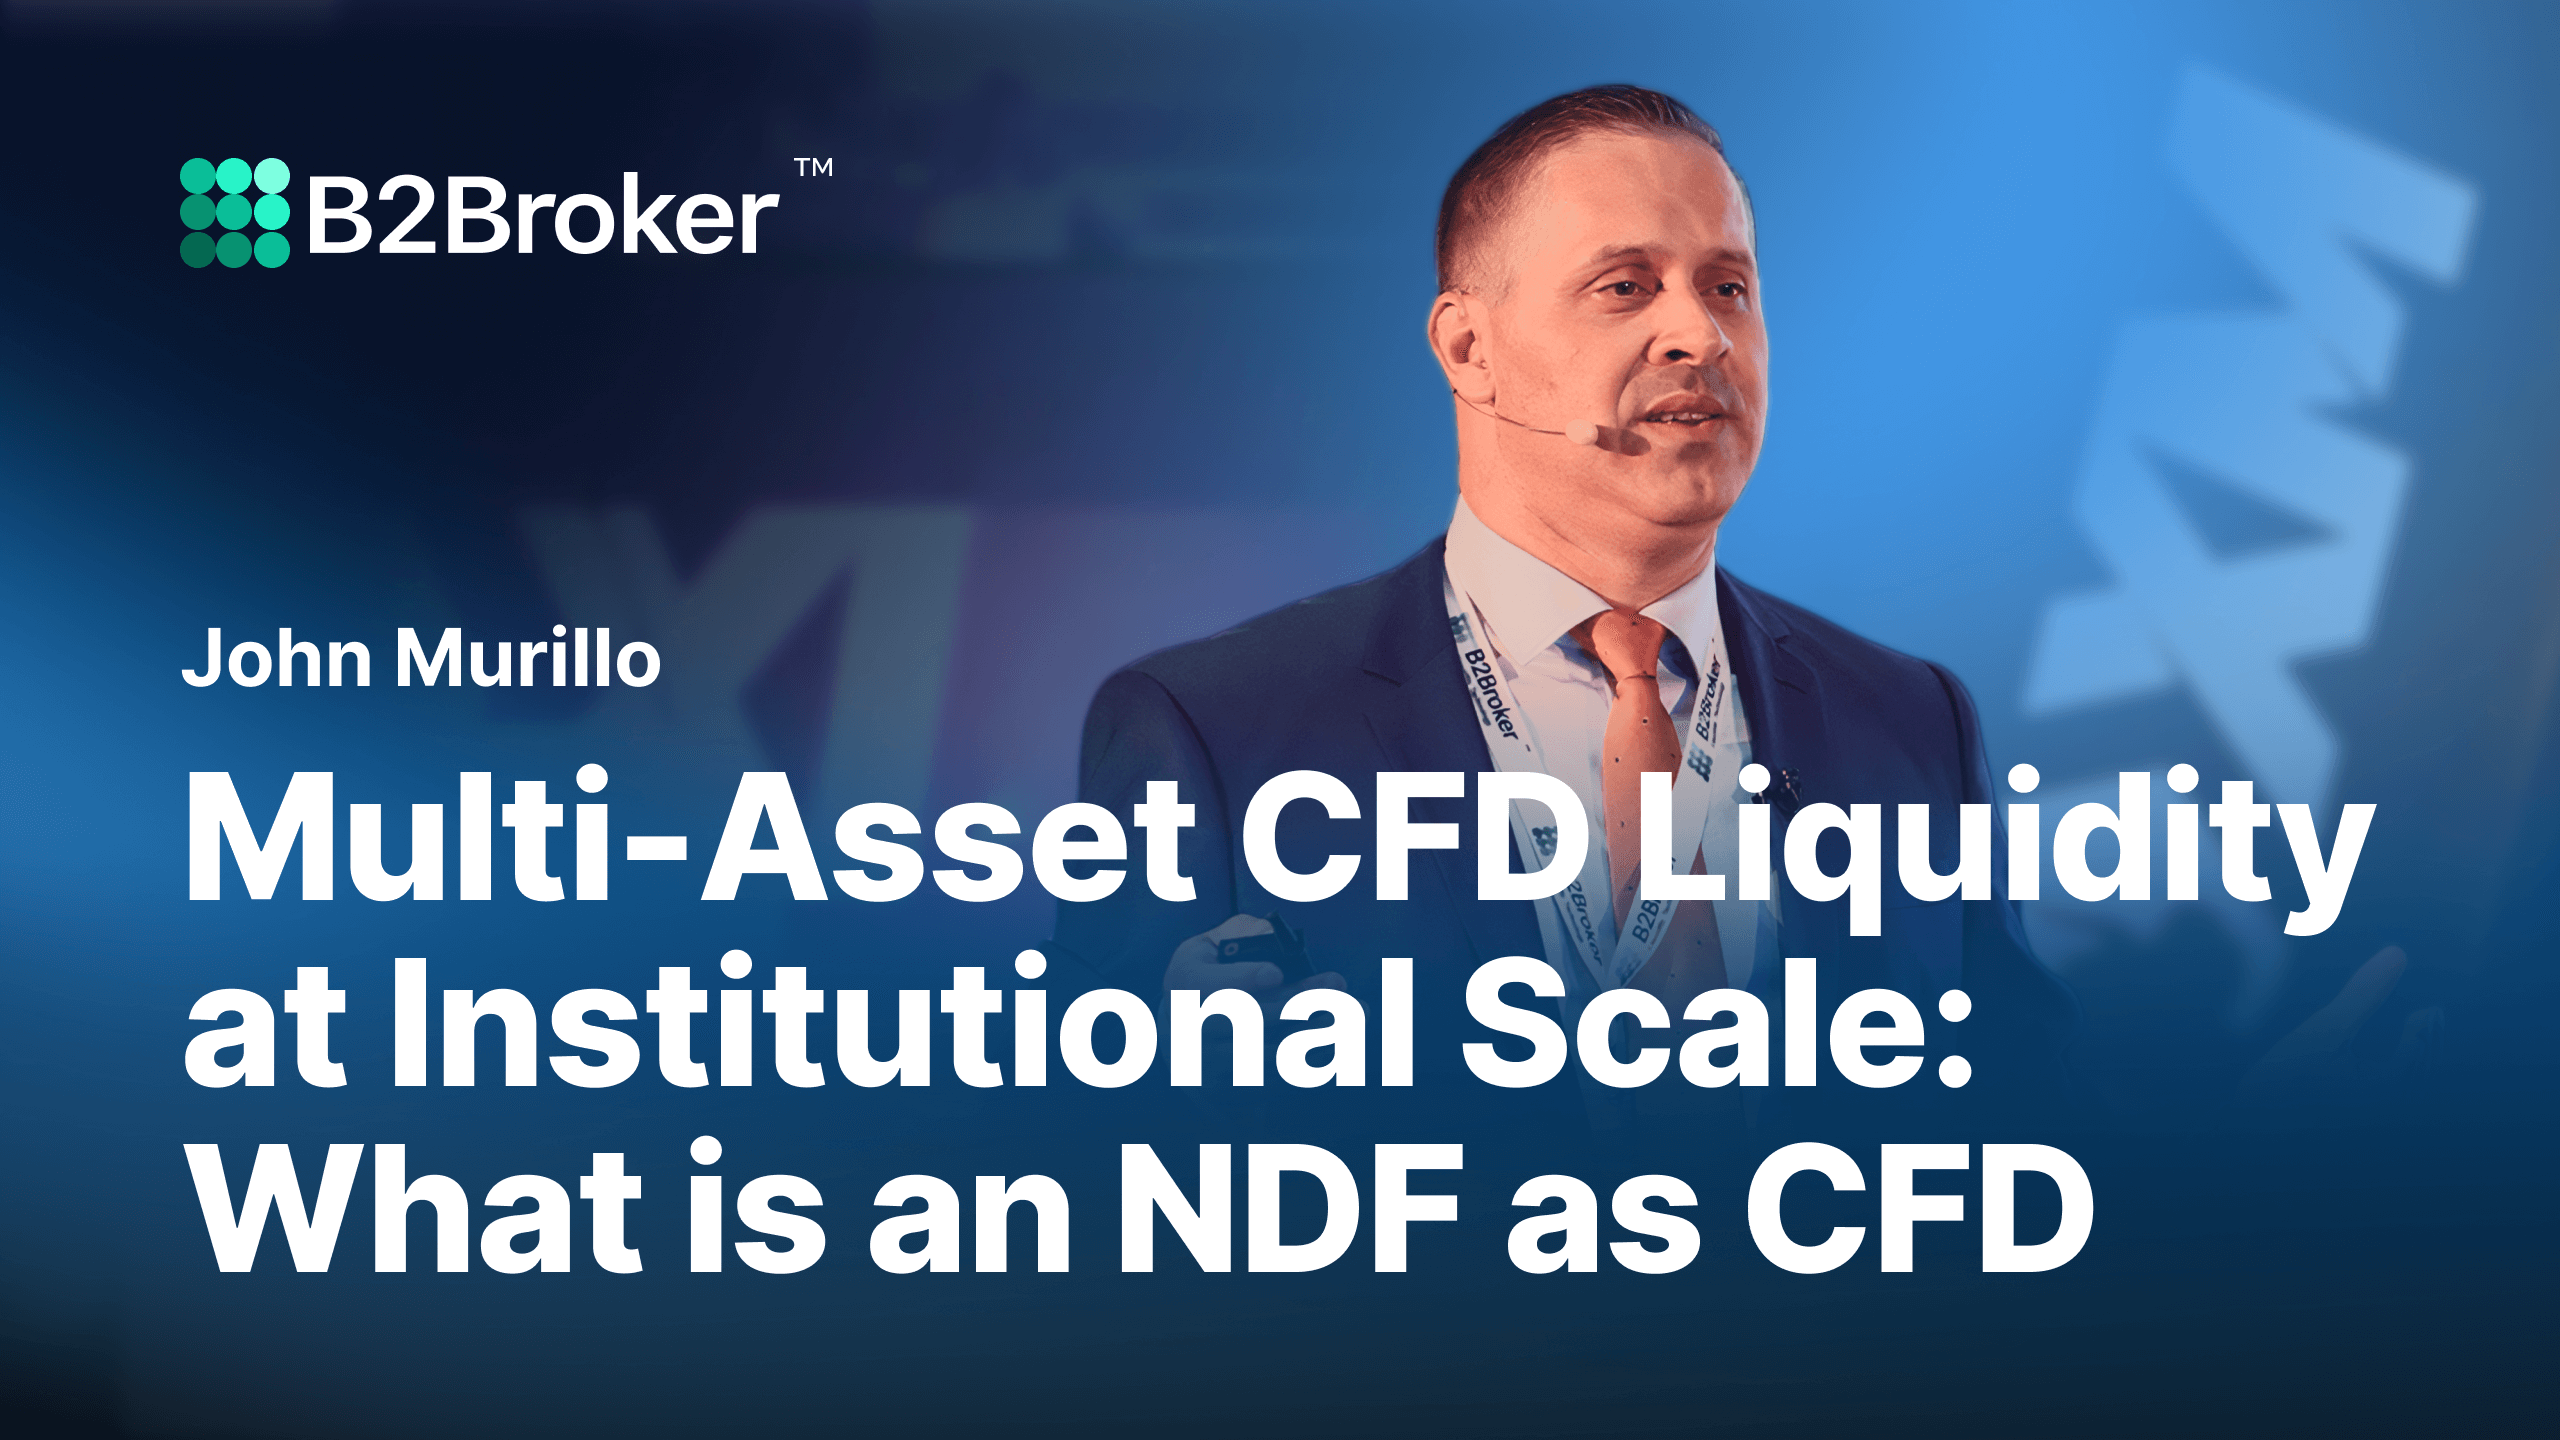 Multi-Asset CFD Liquidity at Institutional Scale: What is an NDF as CFD